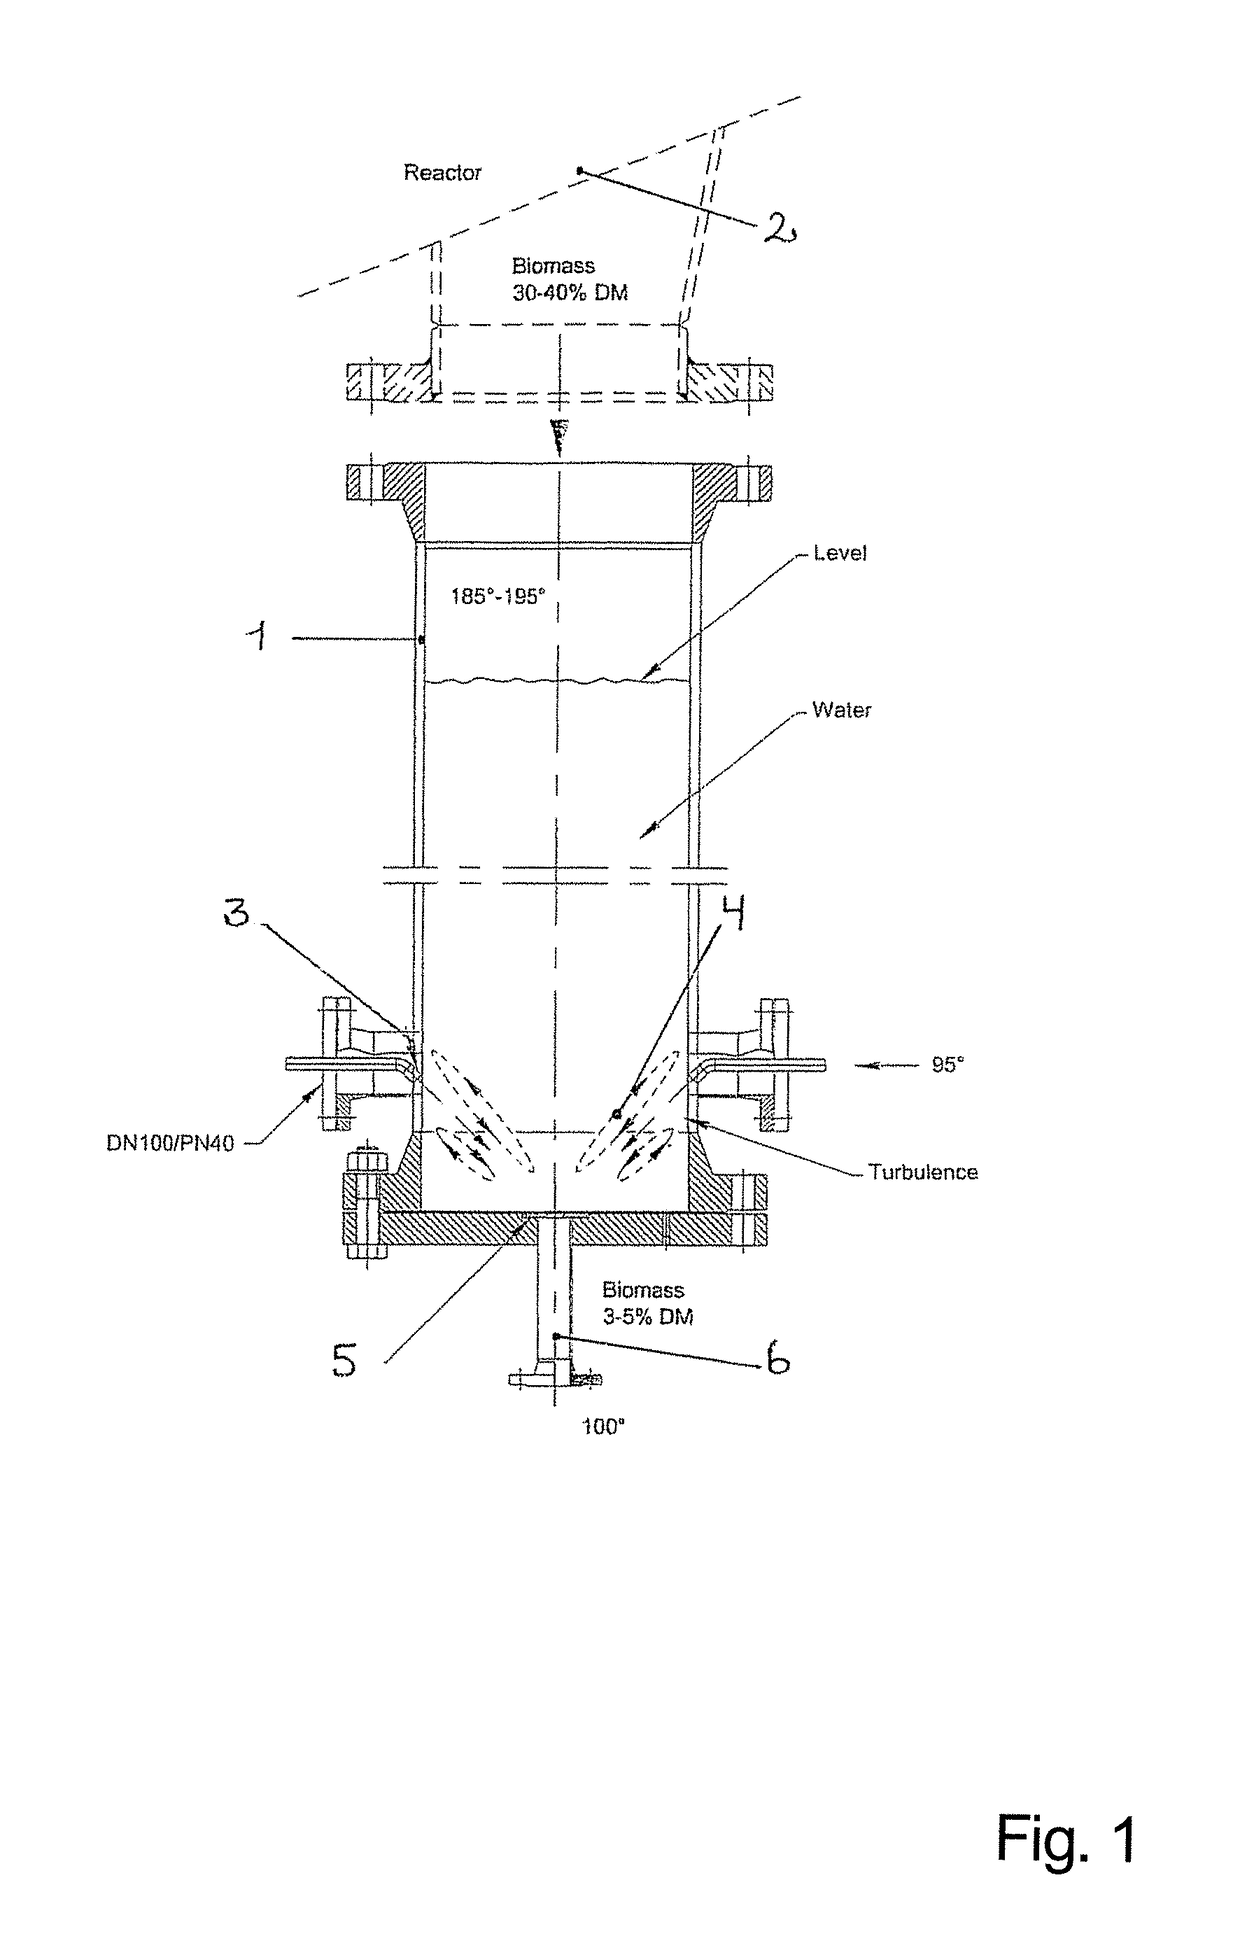 Device for discharging pretreated biomass from higher to lower pressure regions